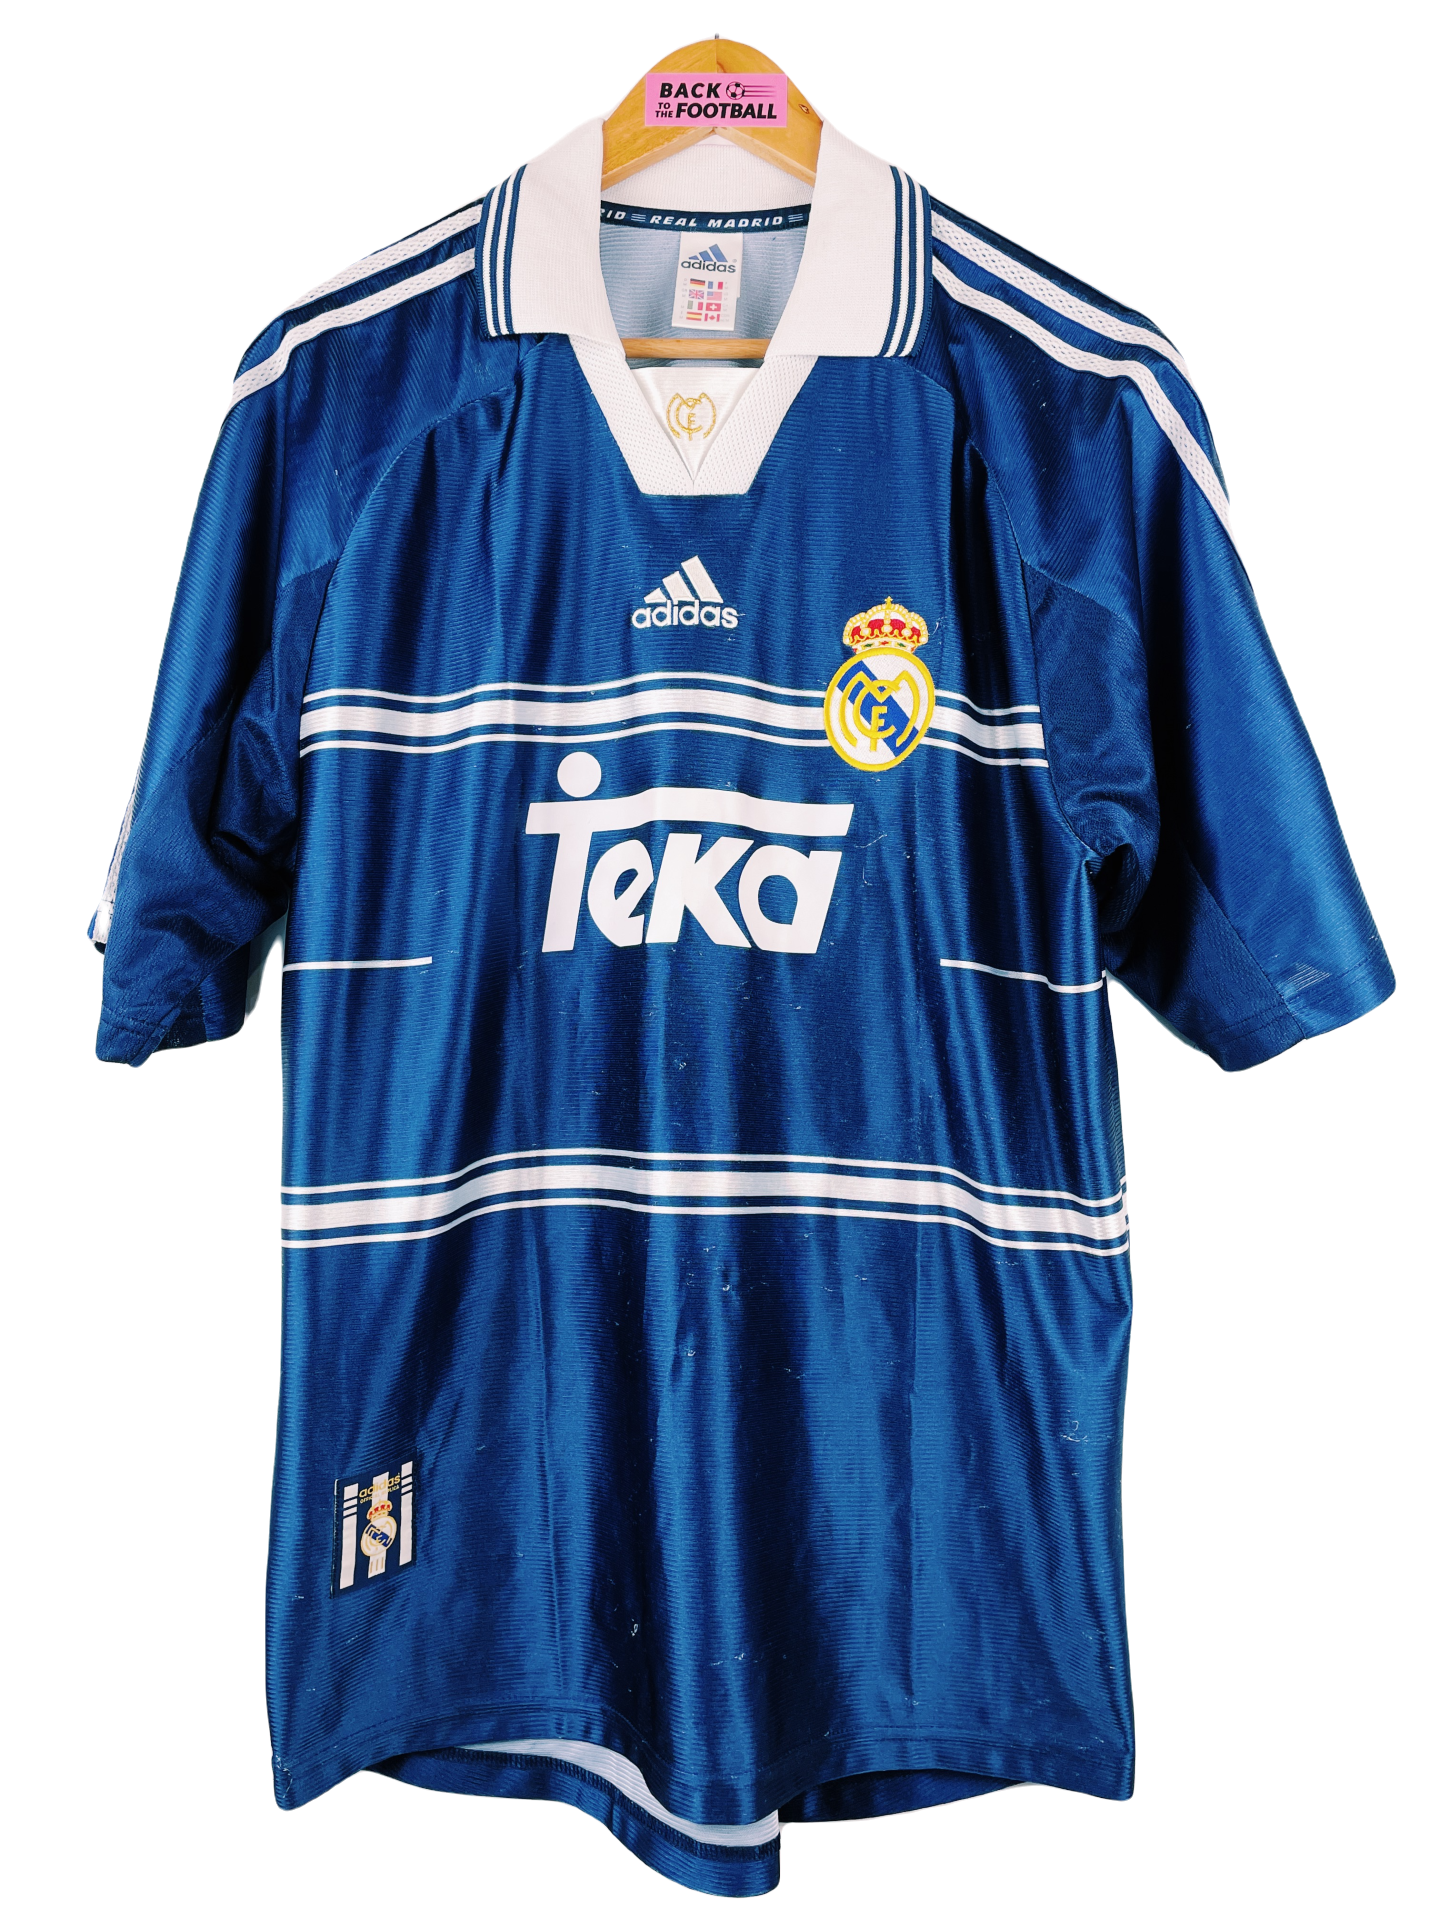 Maillots vintage Real Madrid - Back To The Football